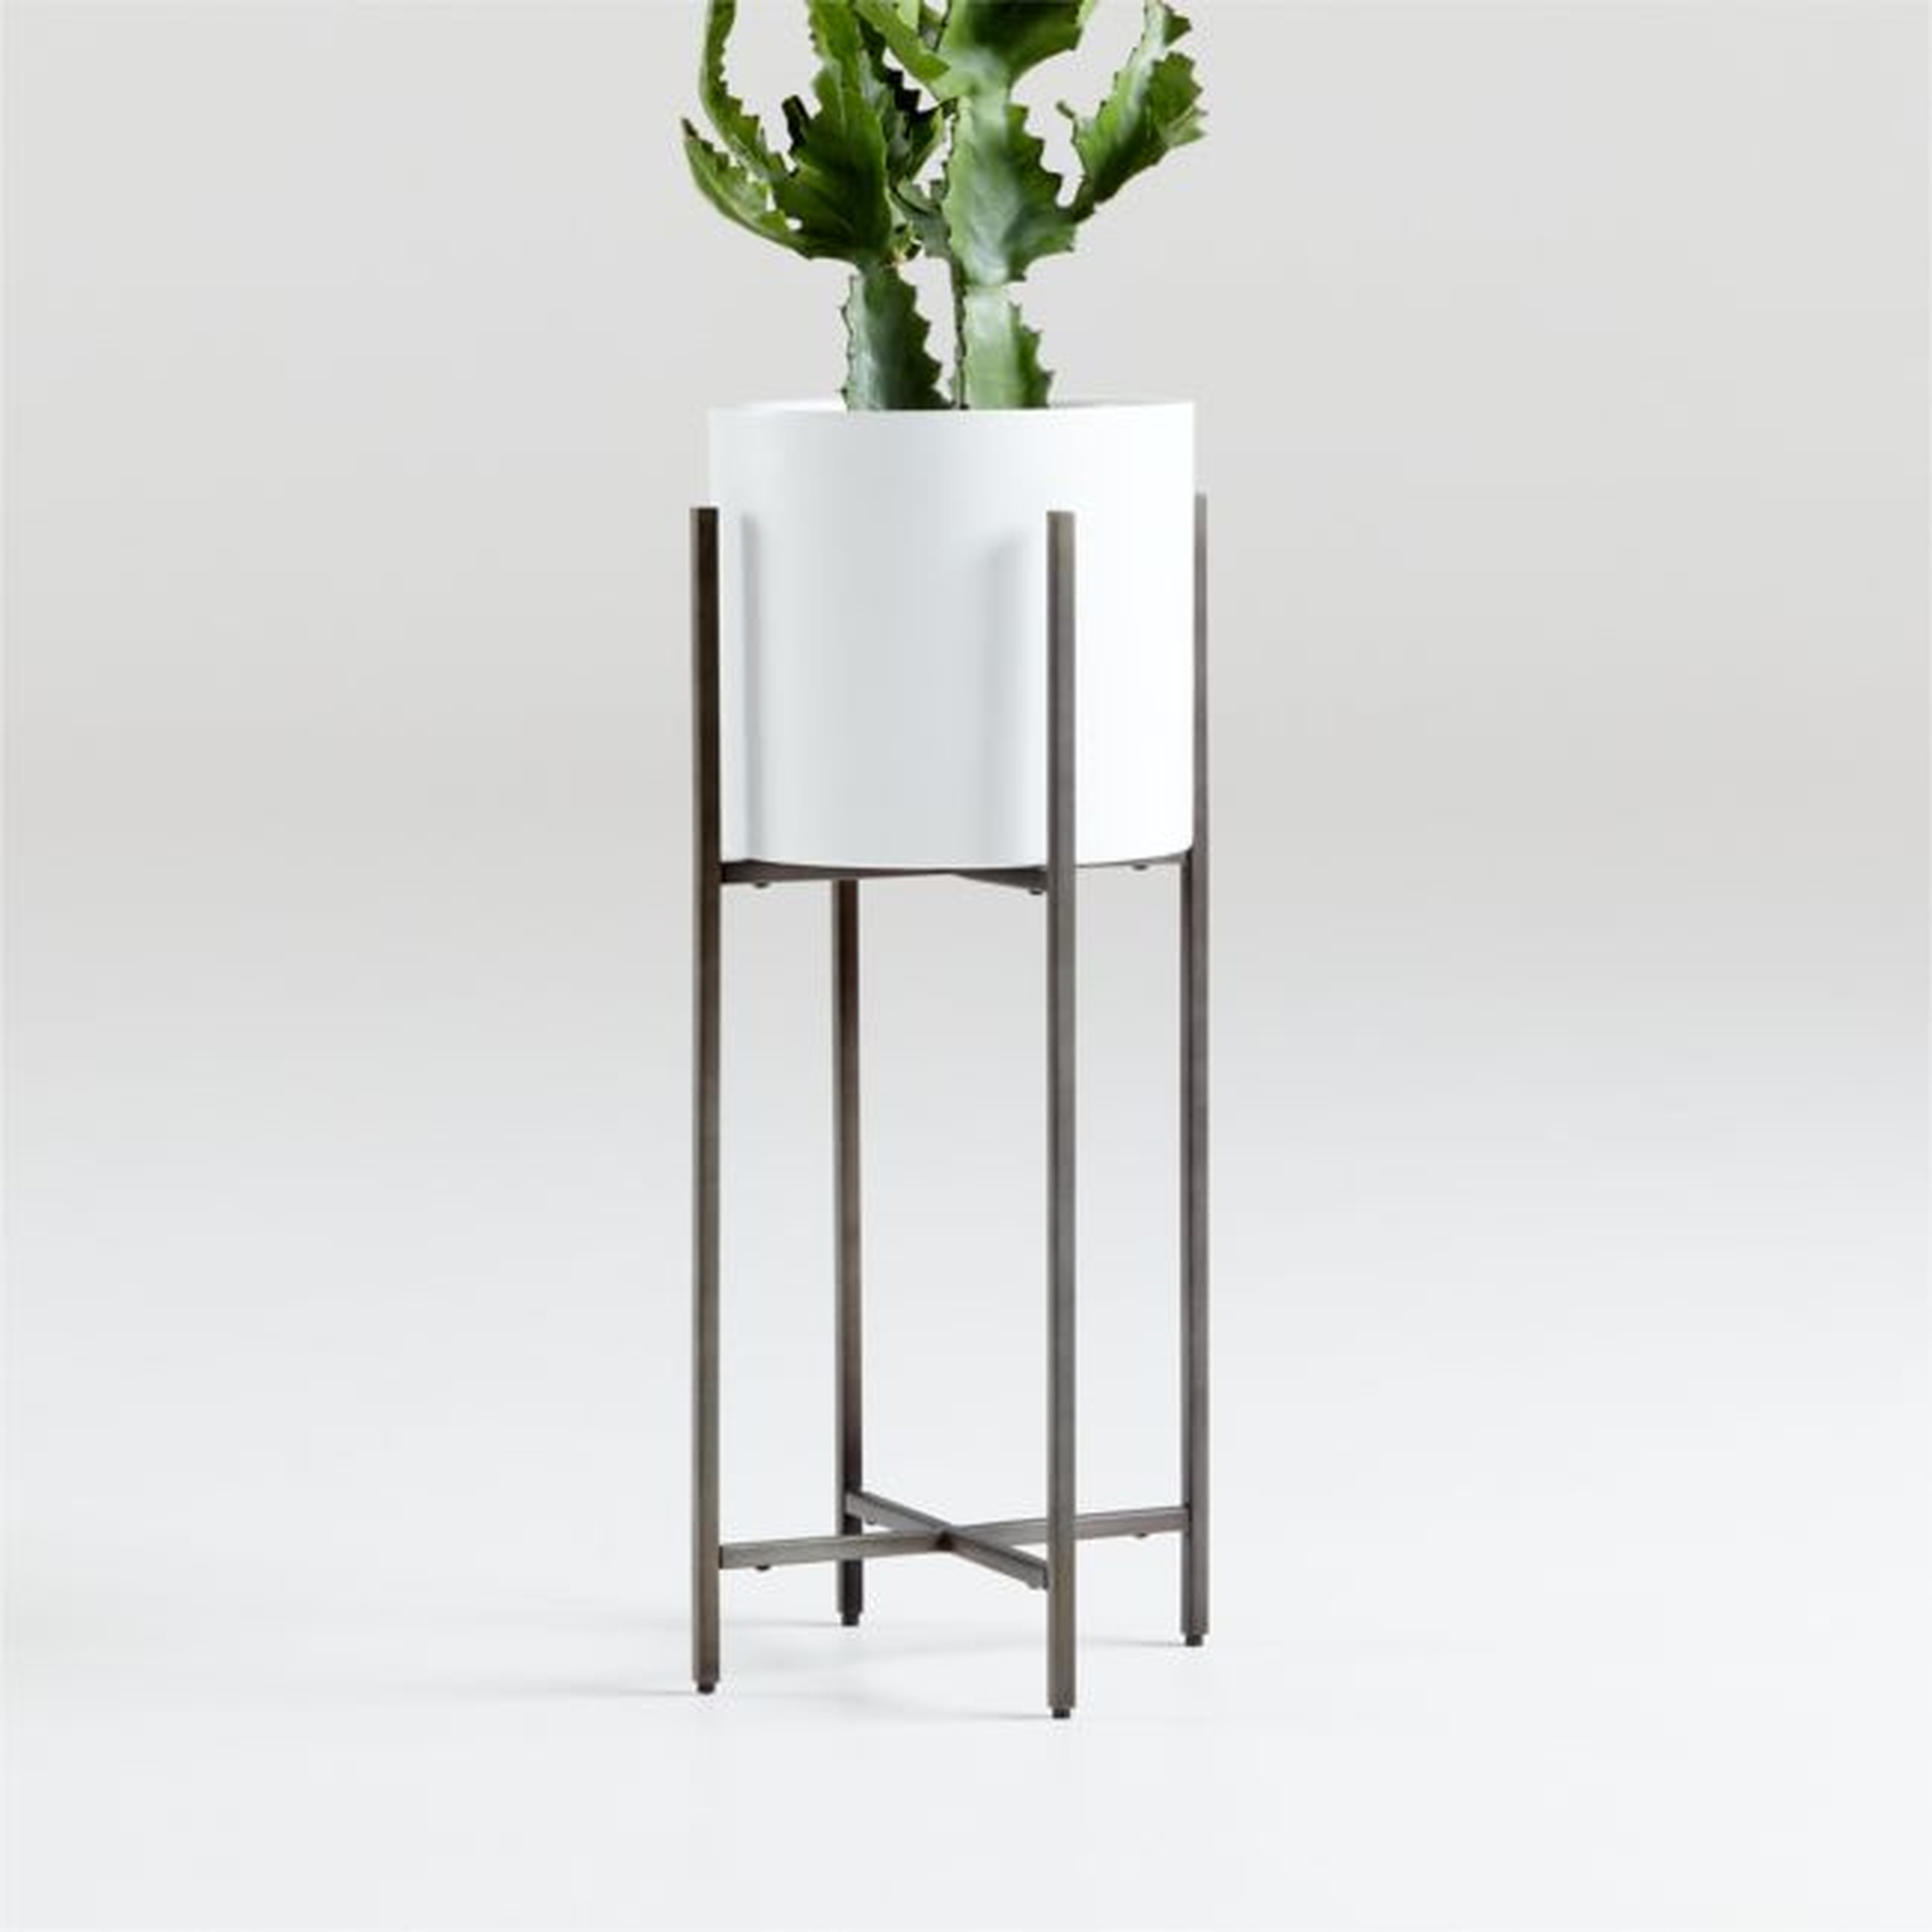 Dundee White Round Indoor/Outdoor Planter with Short Stand - Crate and Barrel